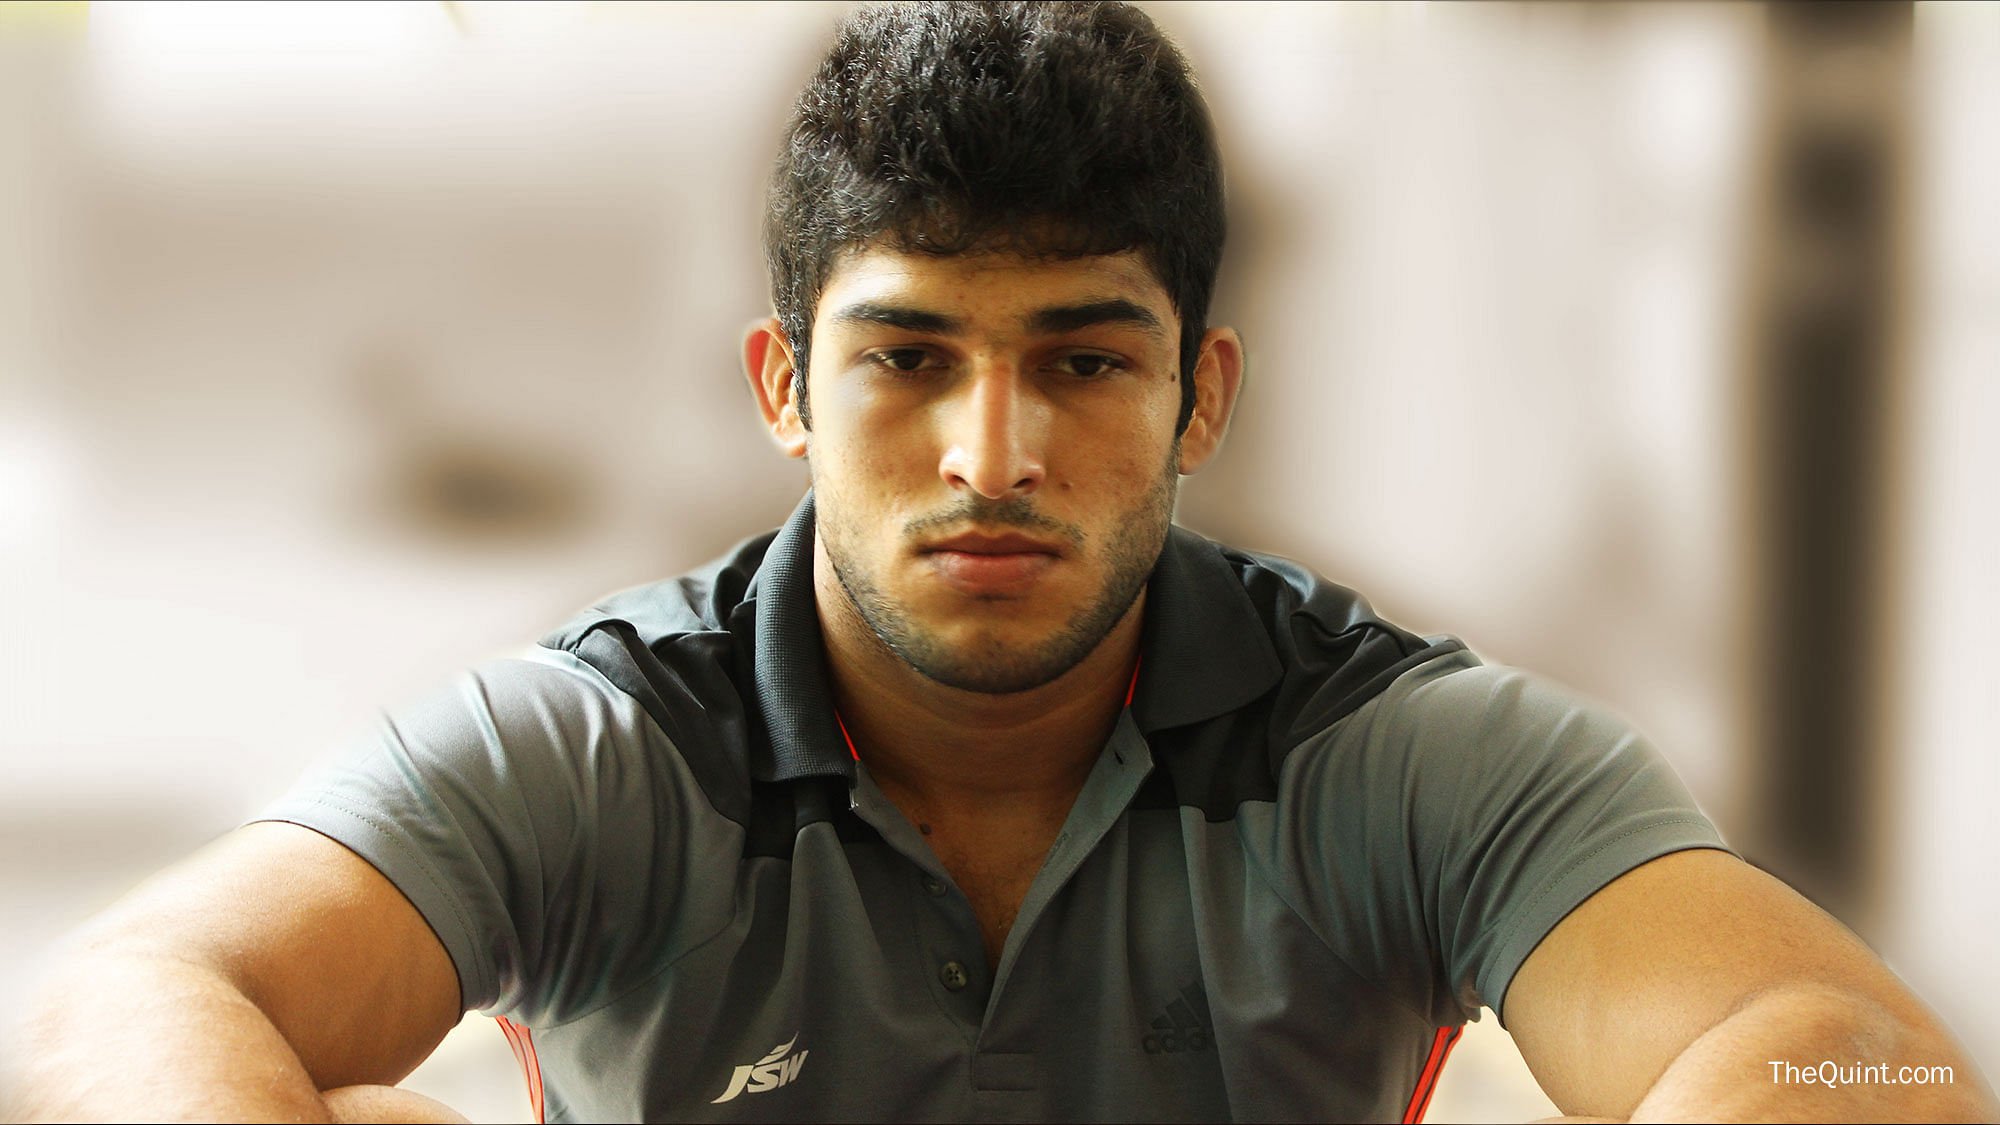 Avtar Singh is the first Indian judoka in 12 years to qualify for the Olympics. (Photo: The Quint)